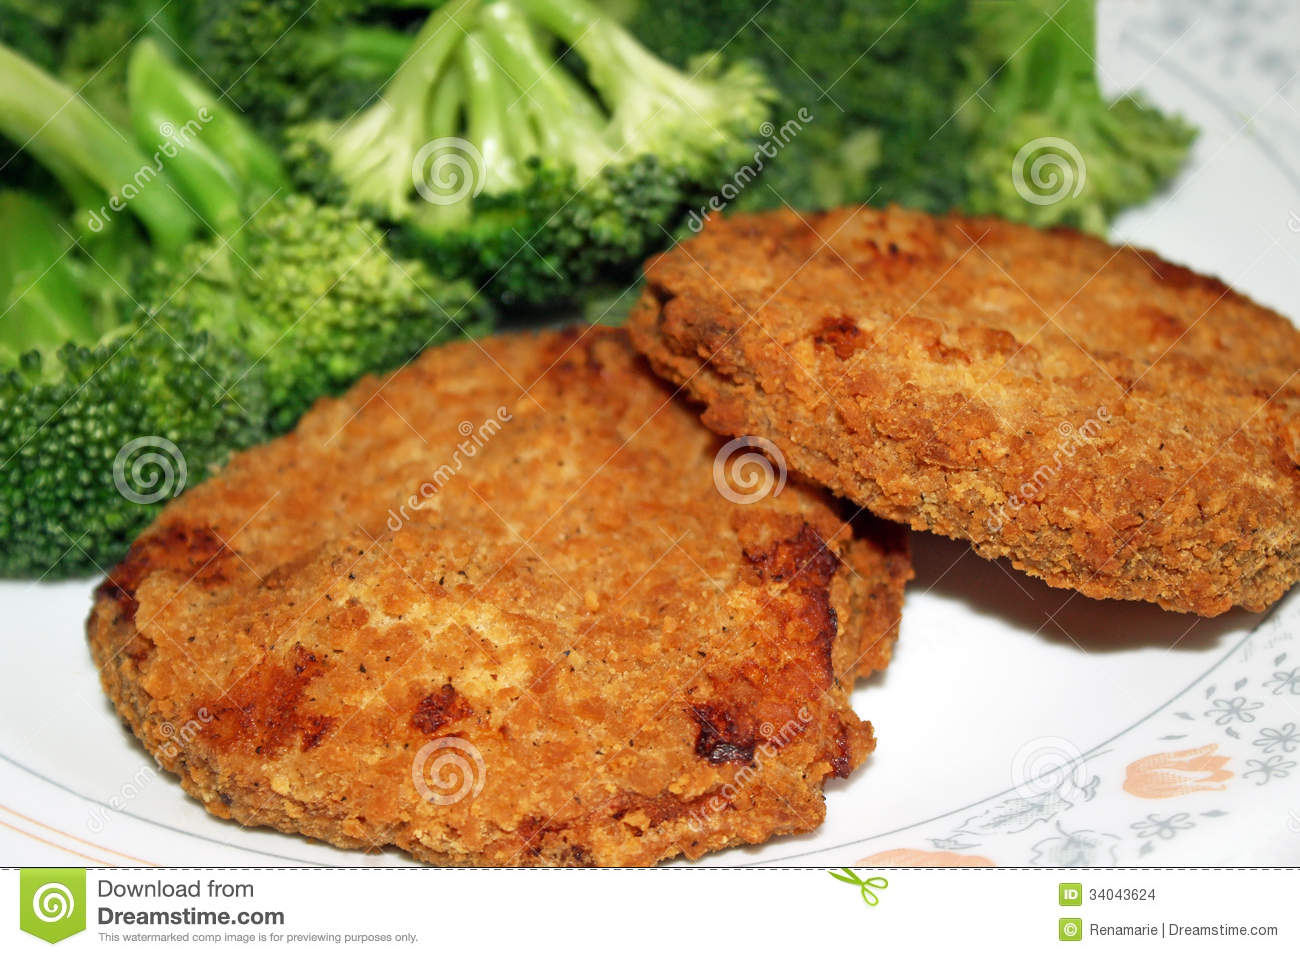 Chicken Patties And Broccoli Stock Images   Image  34043624